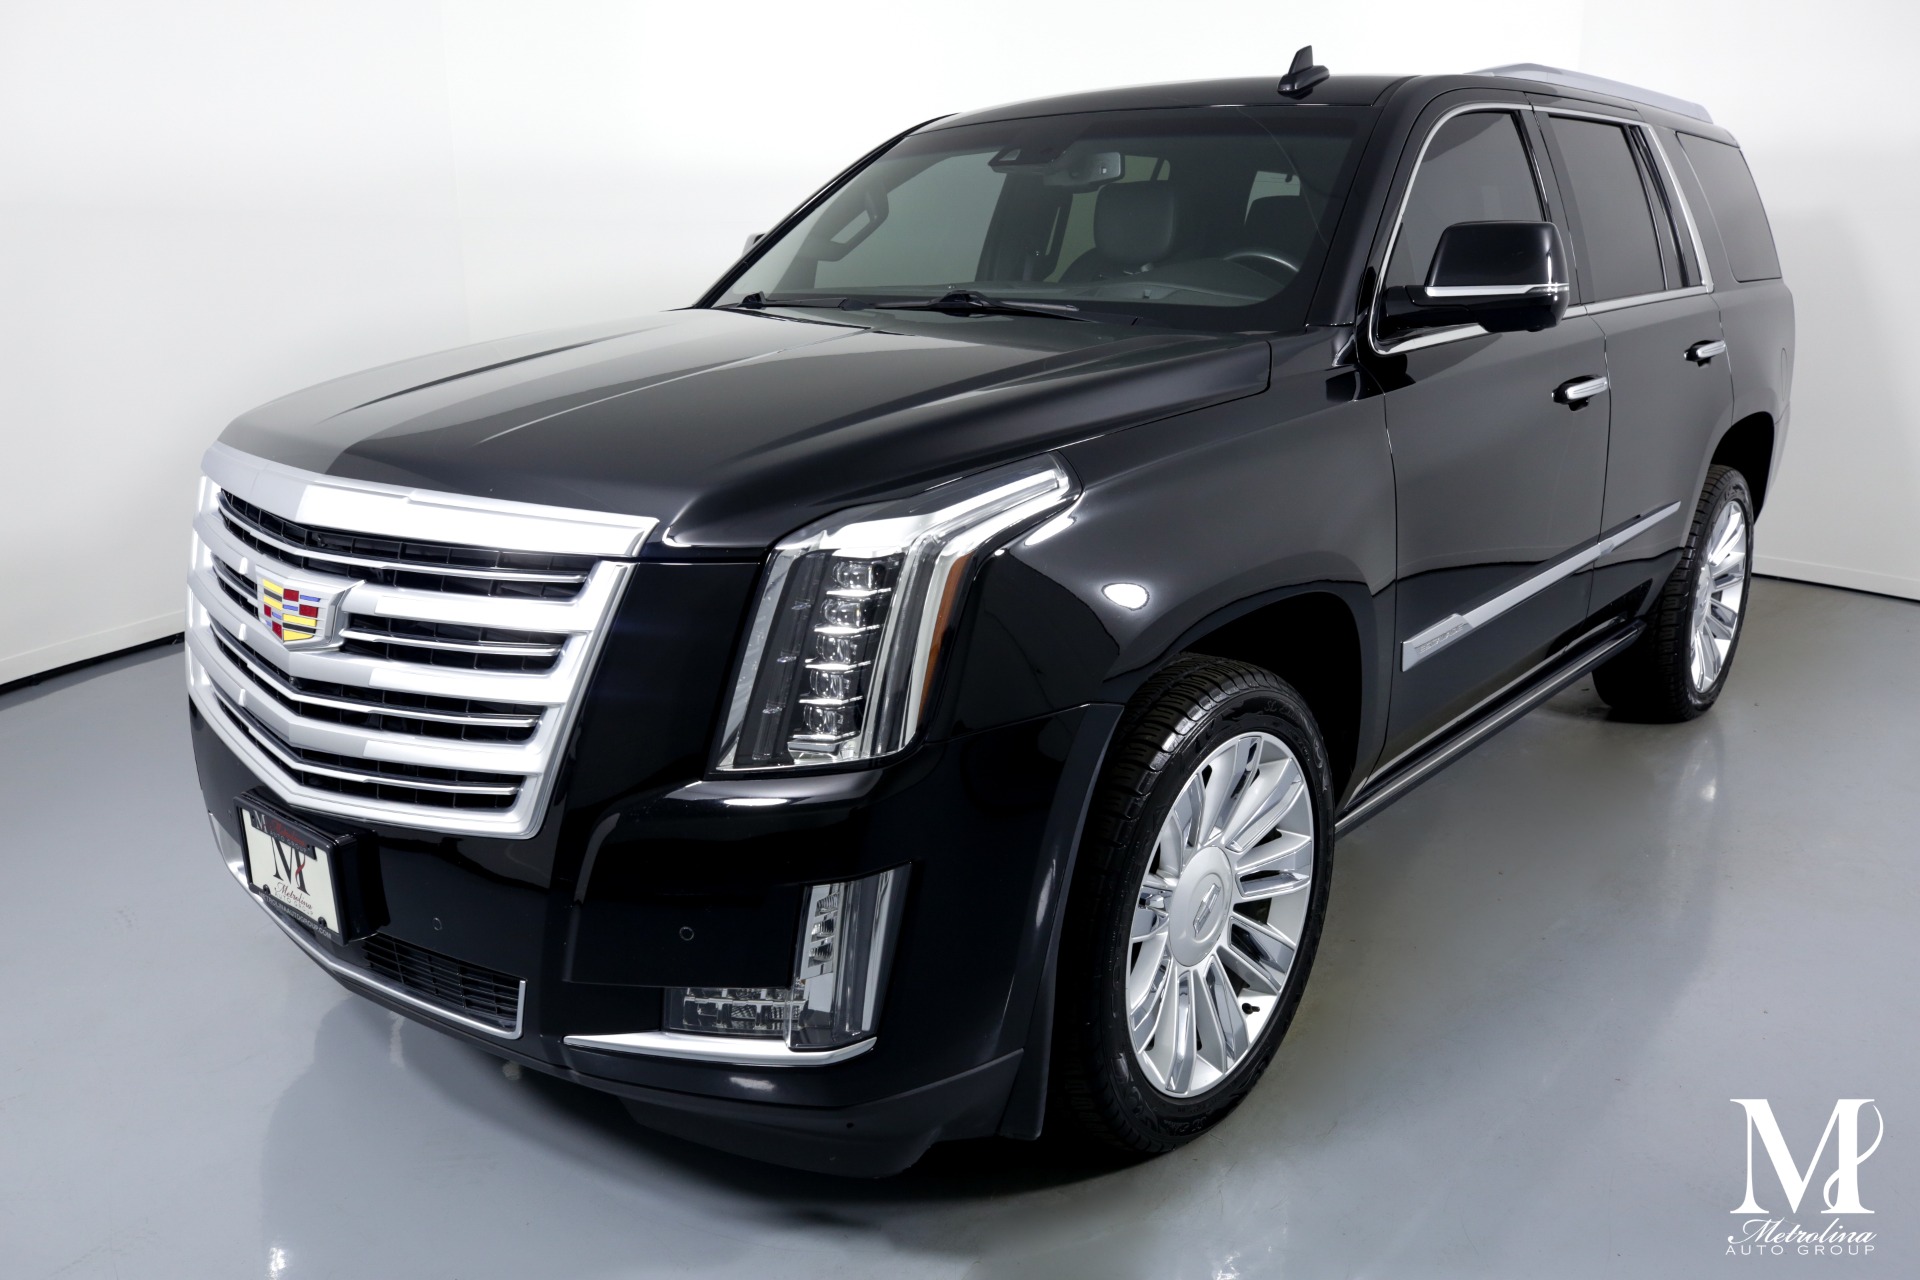 Used 2015 Cadillac Escalade Platinum for sale $49,995 at Metrolina Auto Group in Charlotte NC 28217 - 4